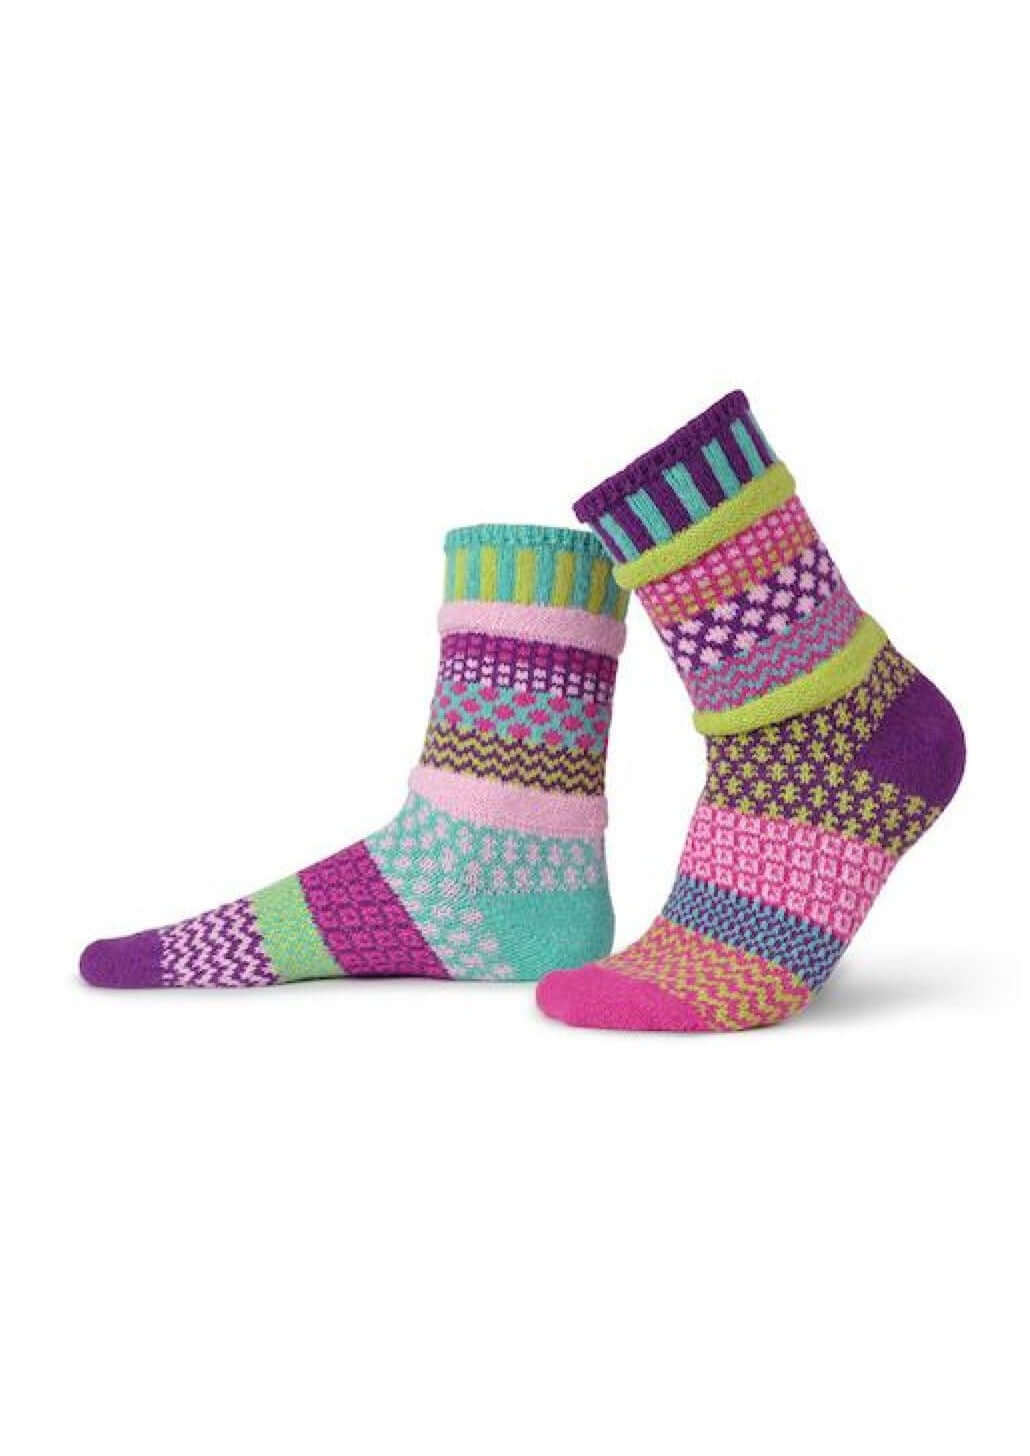 Solmate Socks DAHLIA Knitted Crew Socks Proudly Made USA | These socks are delightfully mismatched & so very comfortable. American Made Clothing